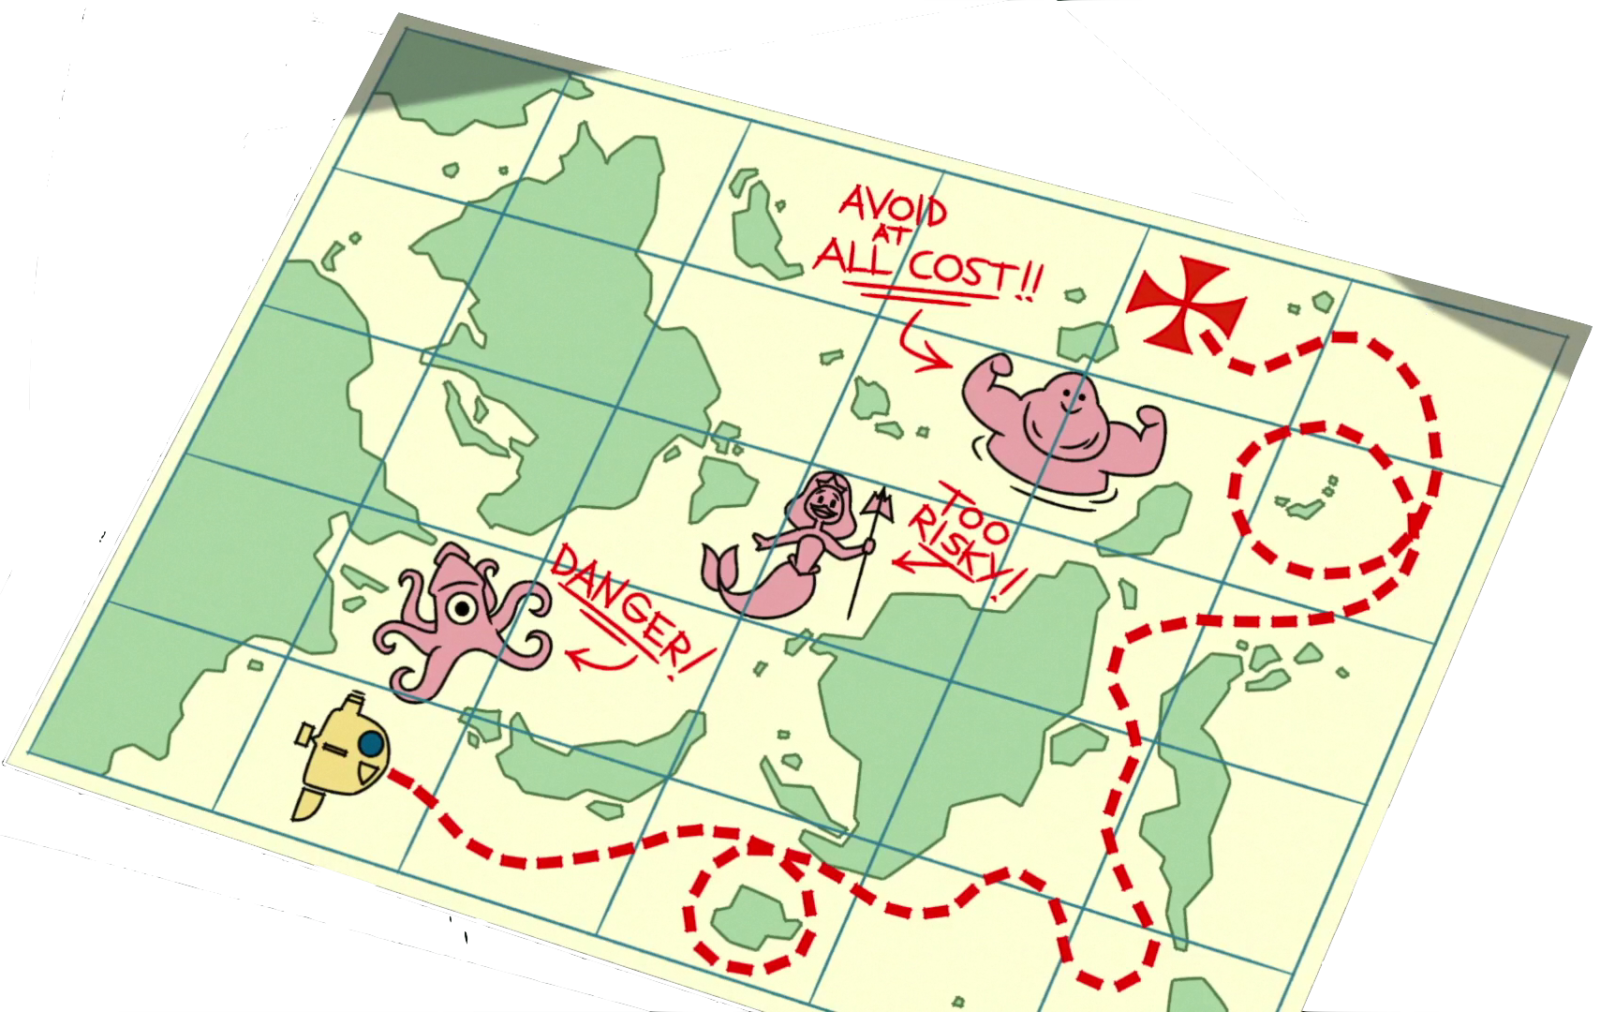 Map of semi-charted waters, courtesy of Ducktales.